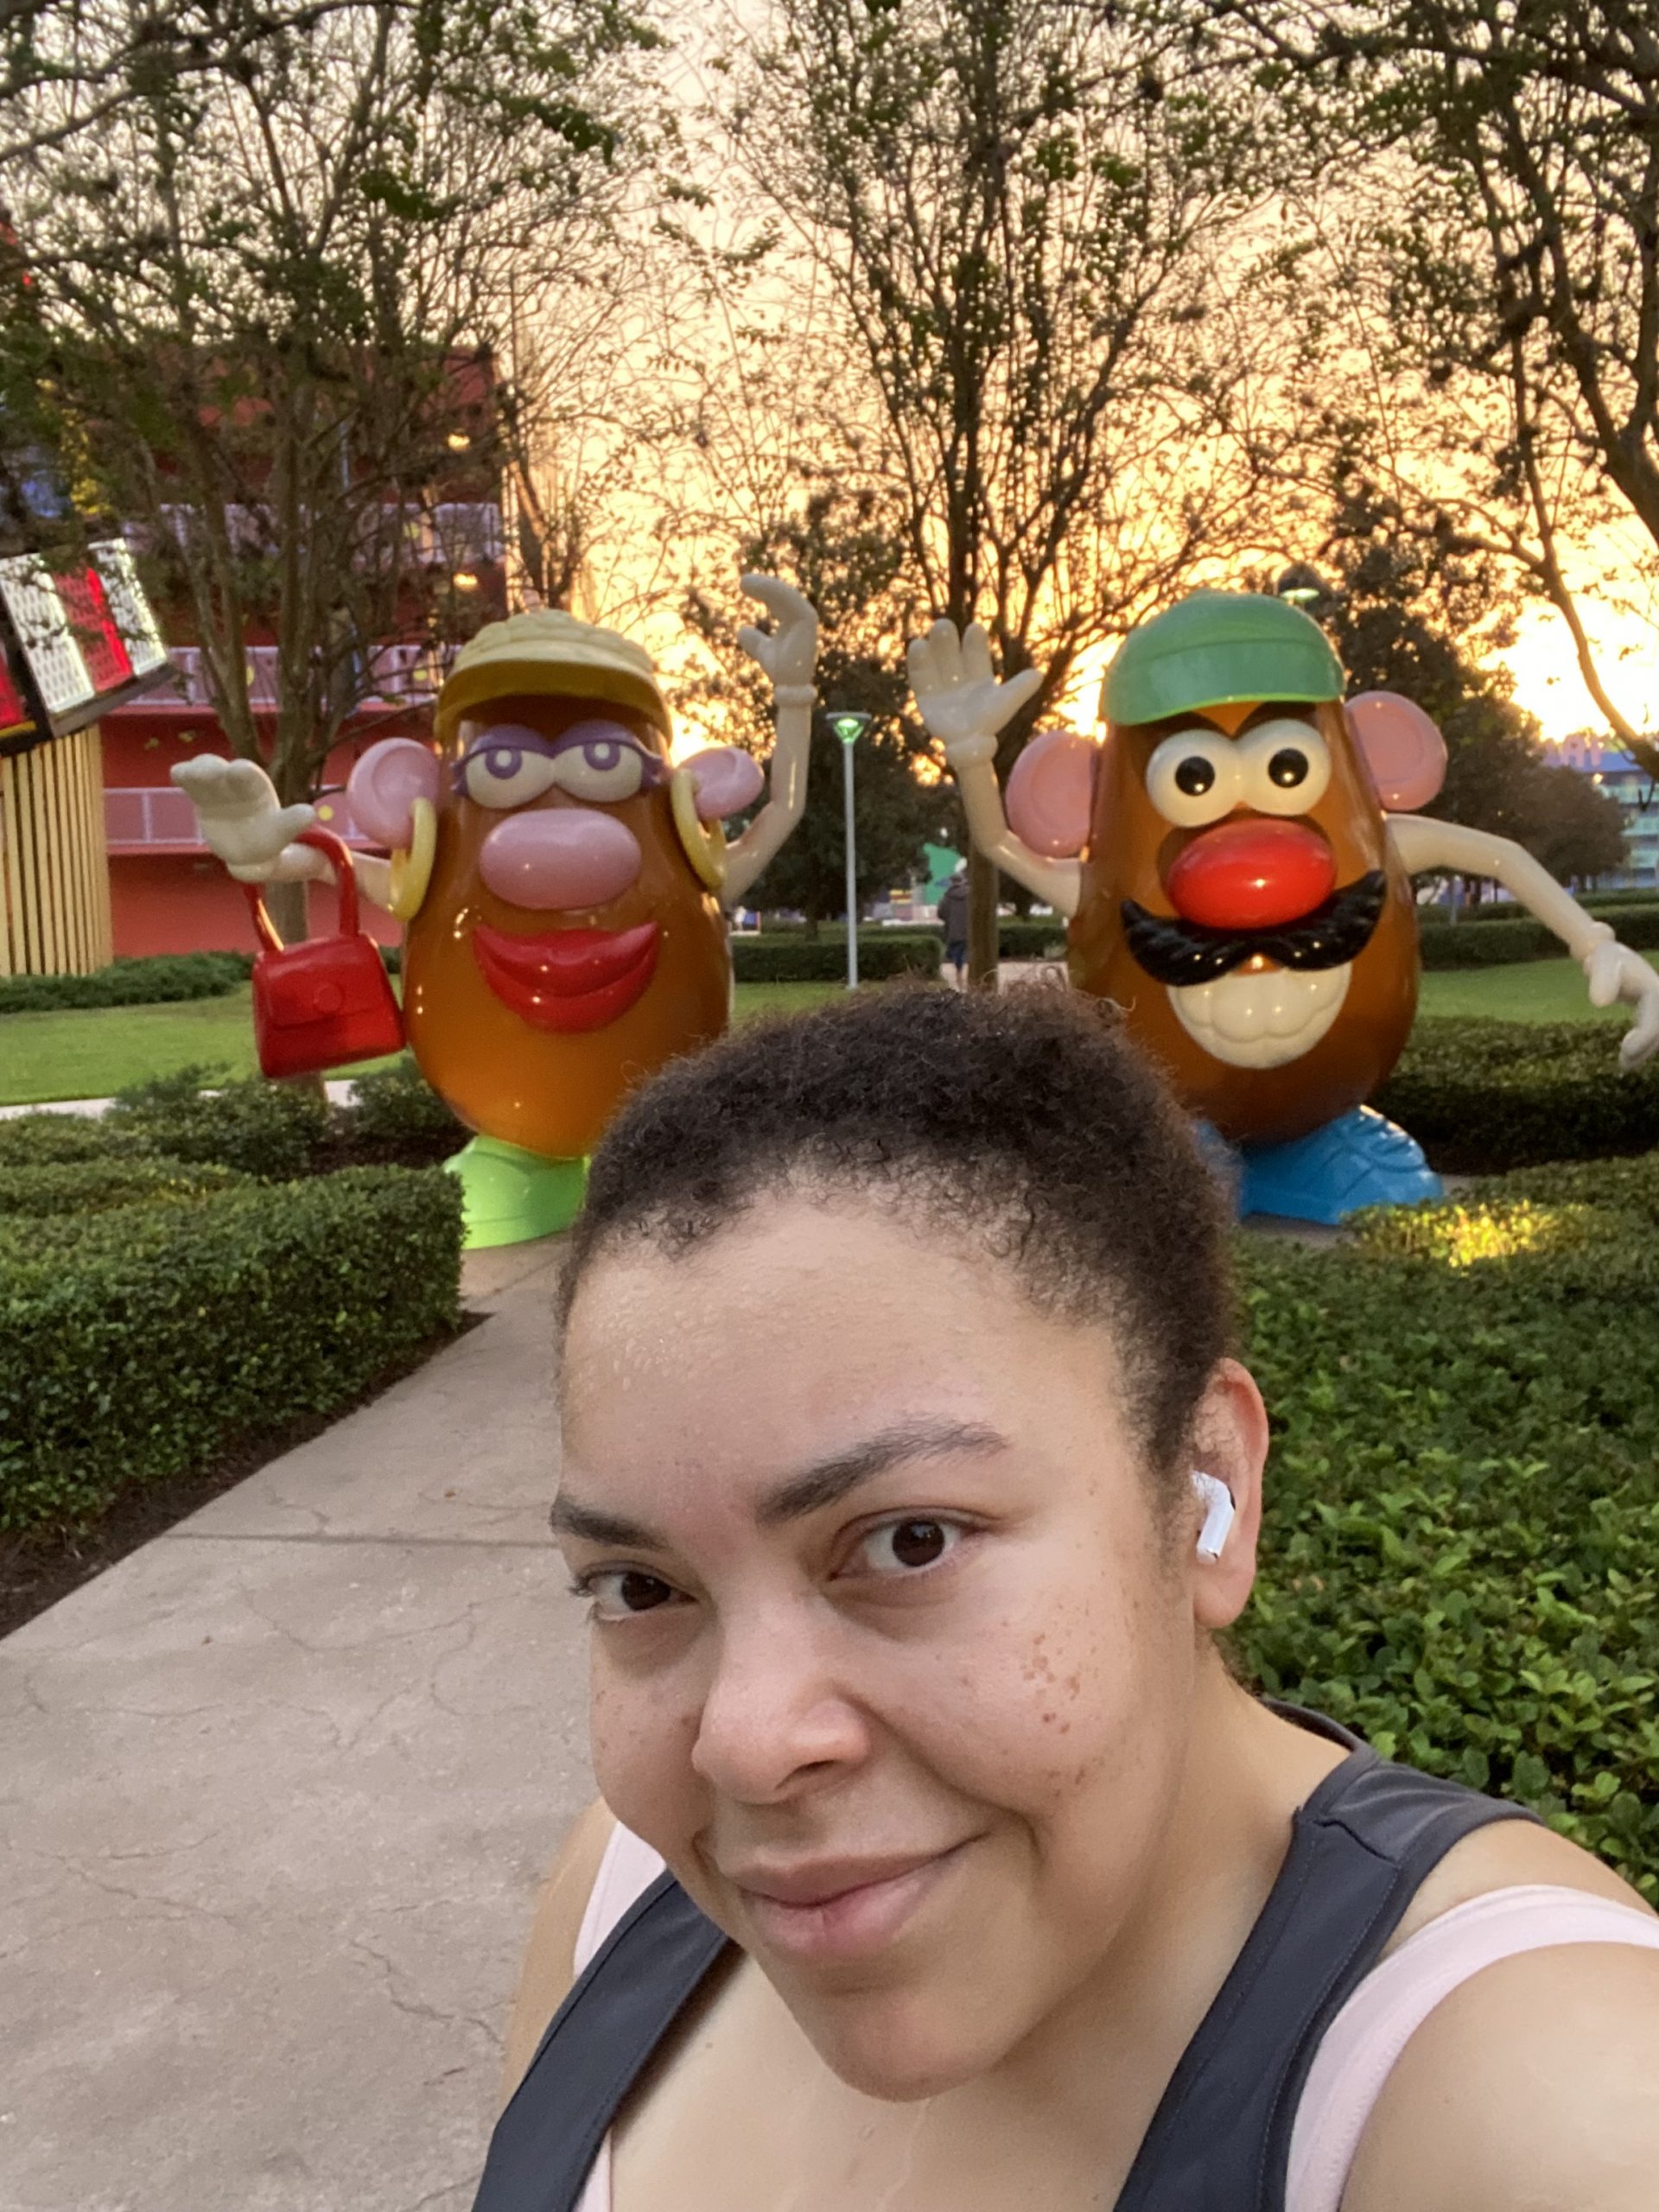 Woman poses in front of statues of Mr and Mrs Potato Head